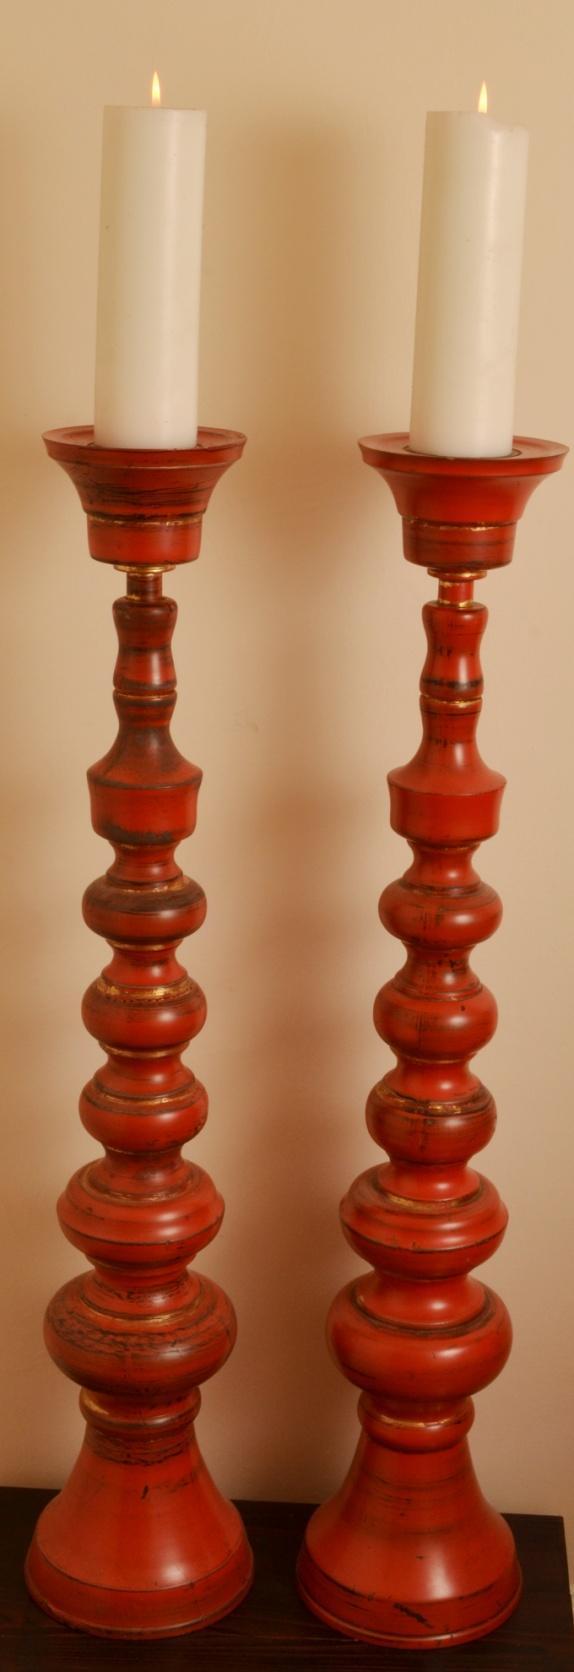 Title: Meiji Ceremonial Candlesticks (37 ) (14-007) Created: June 2014 Materials: Maple, lacquer Dimensions: 37 h X 8 w Retail Price: